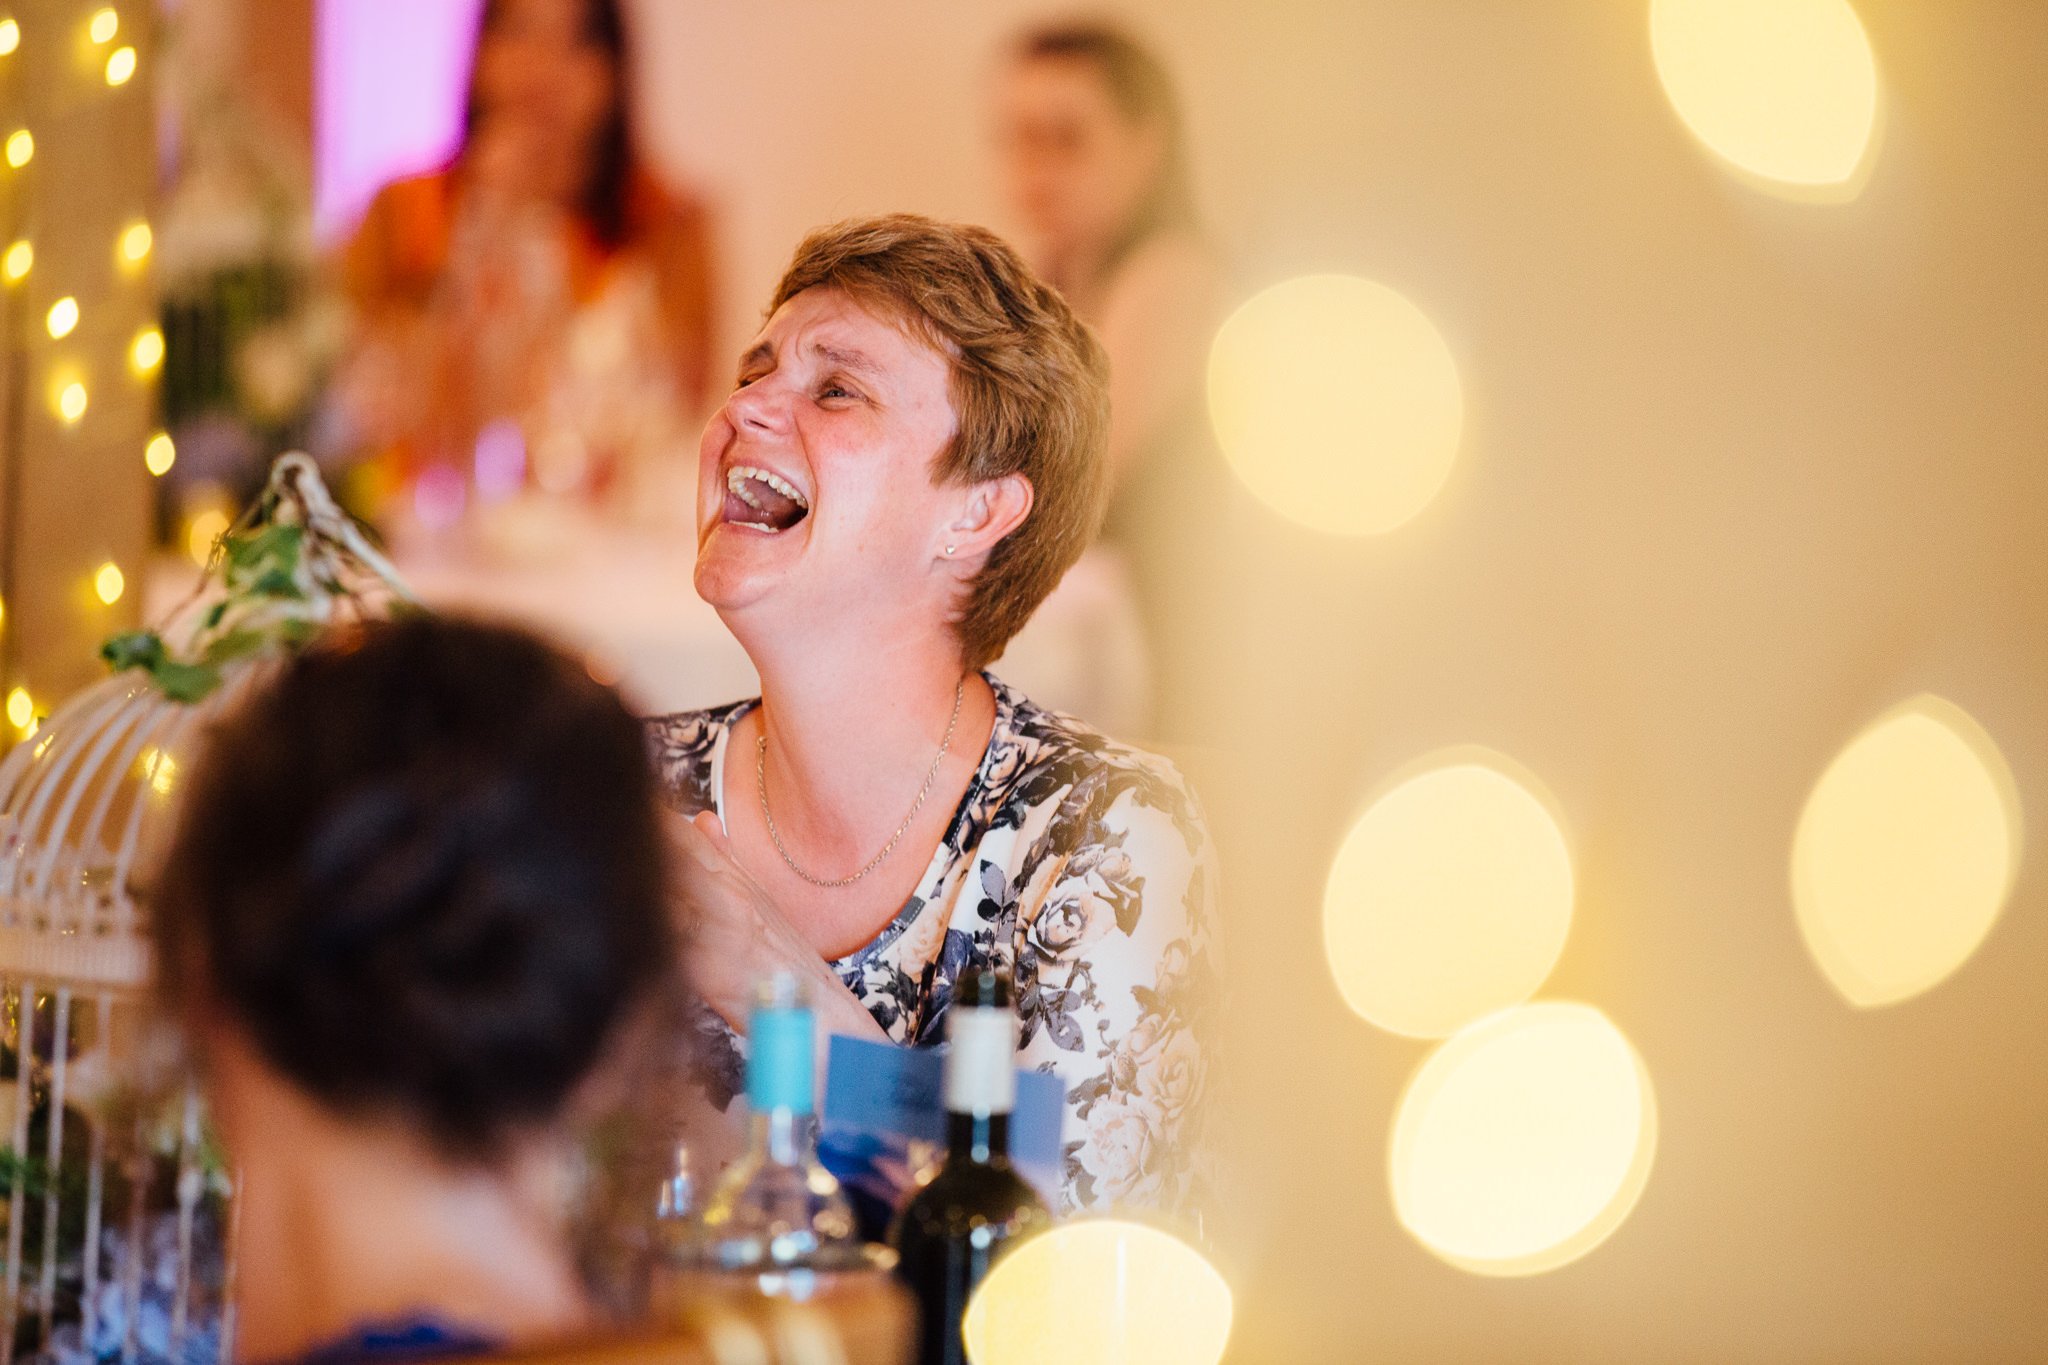  Female wedding guest laughing 